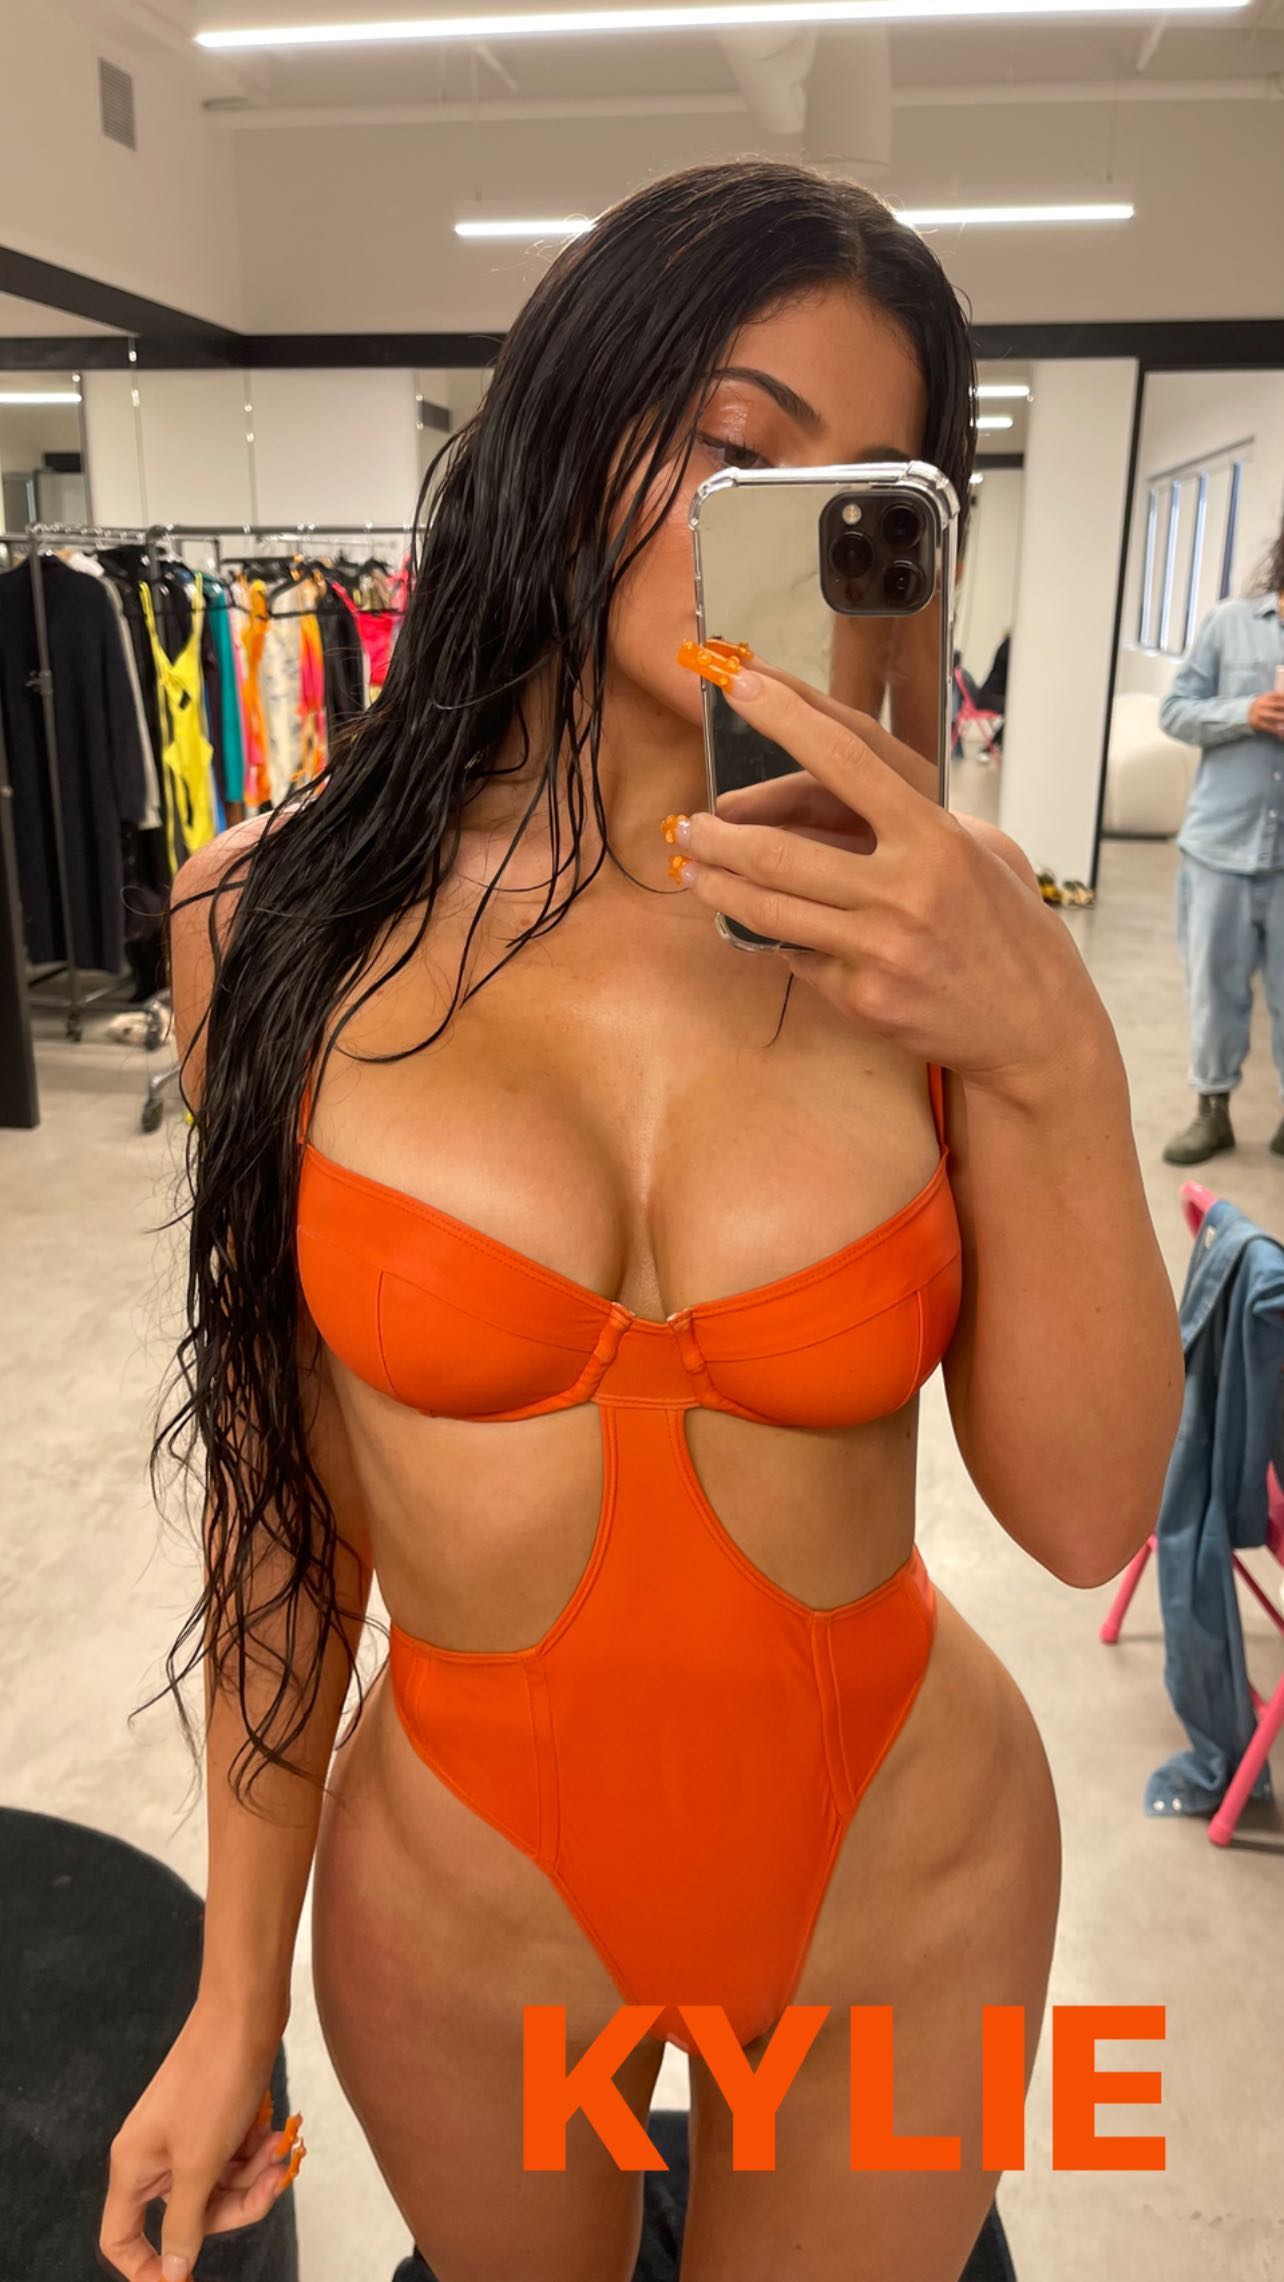 Kylie Jenner Shares Thirst Trap While Cheating Rumors Swirl! - Photo 42